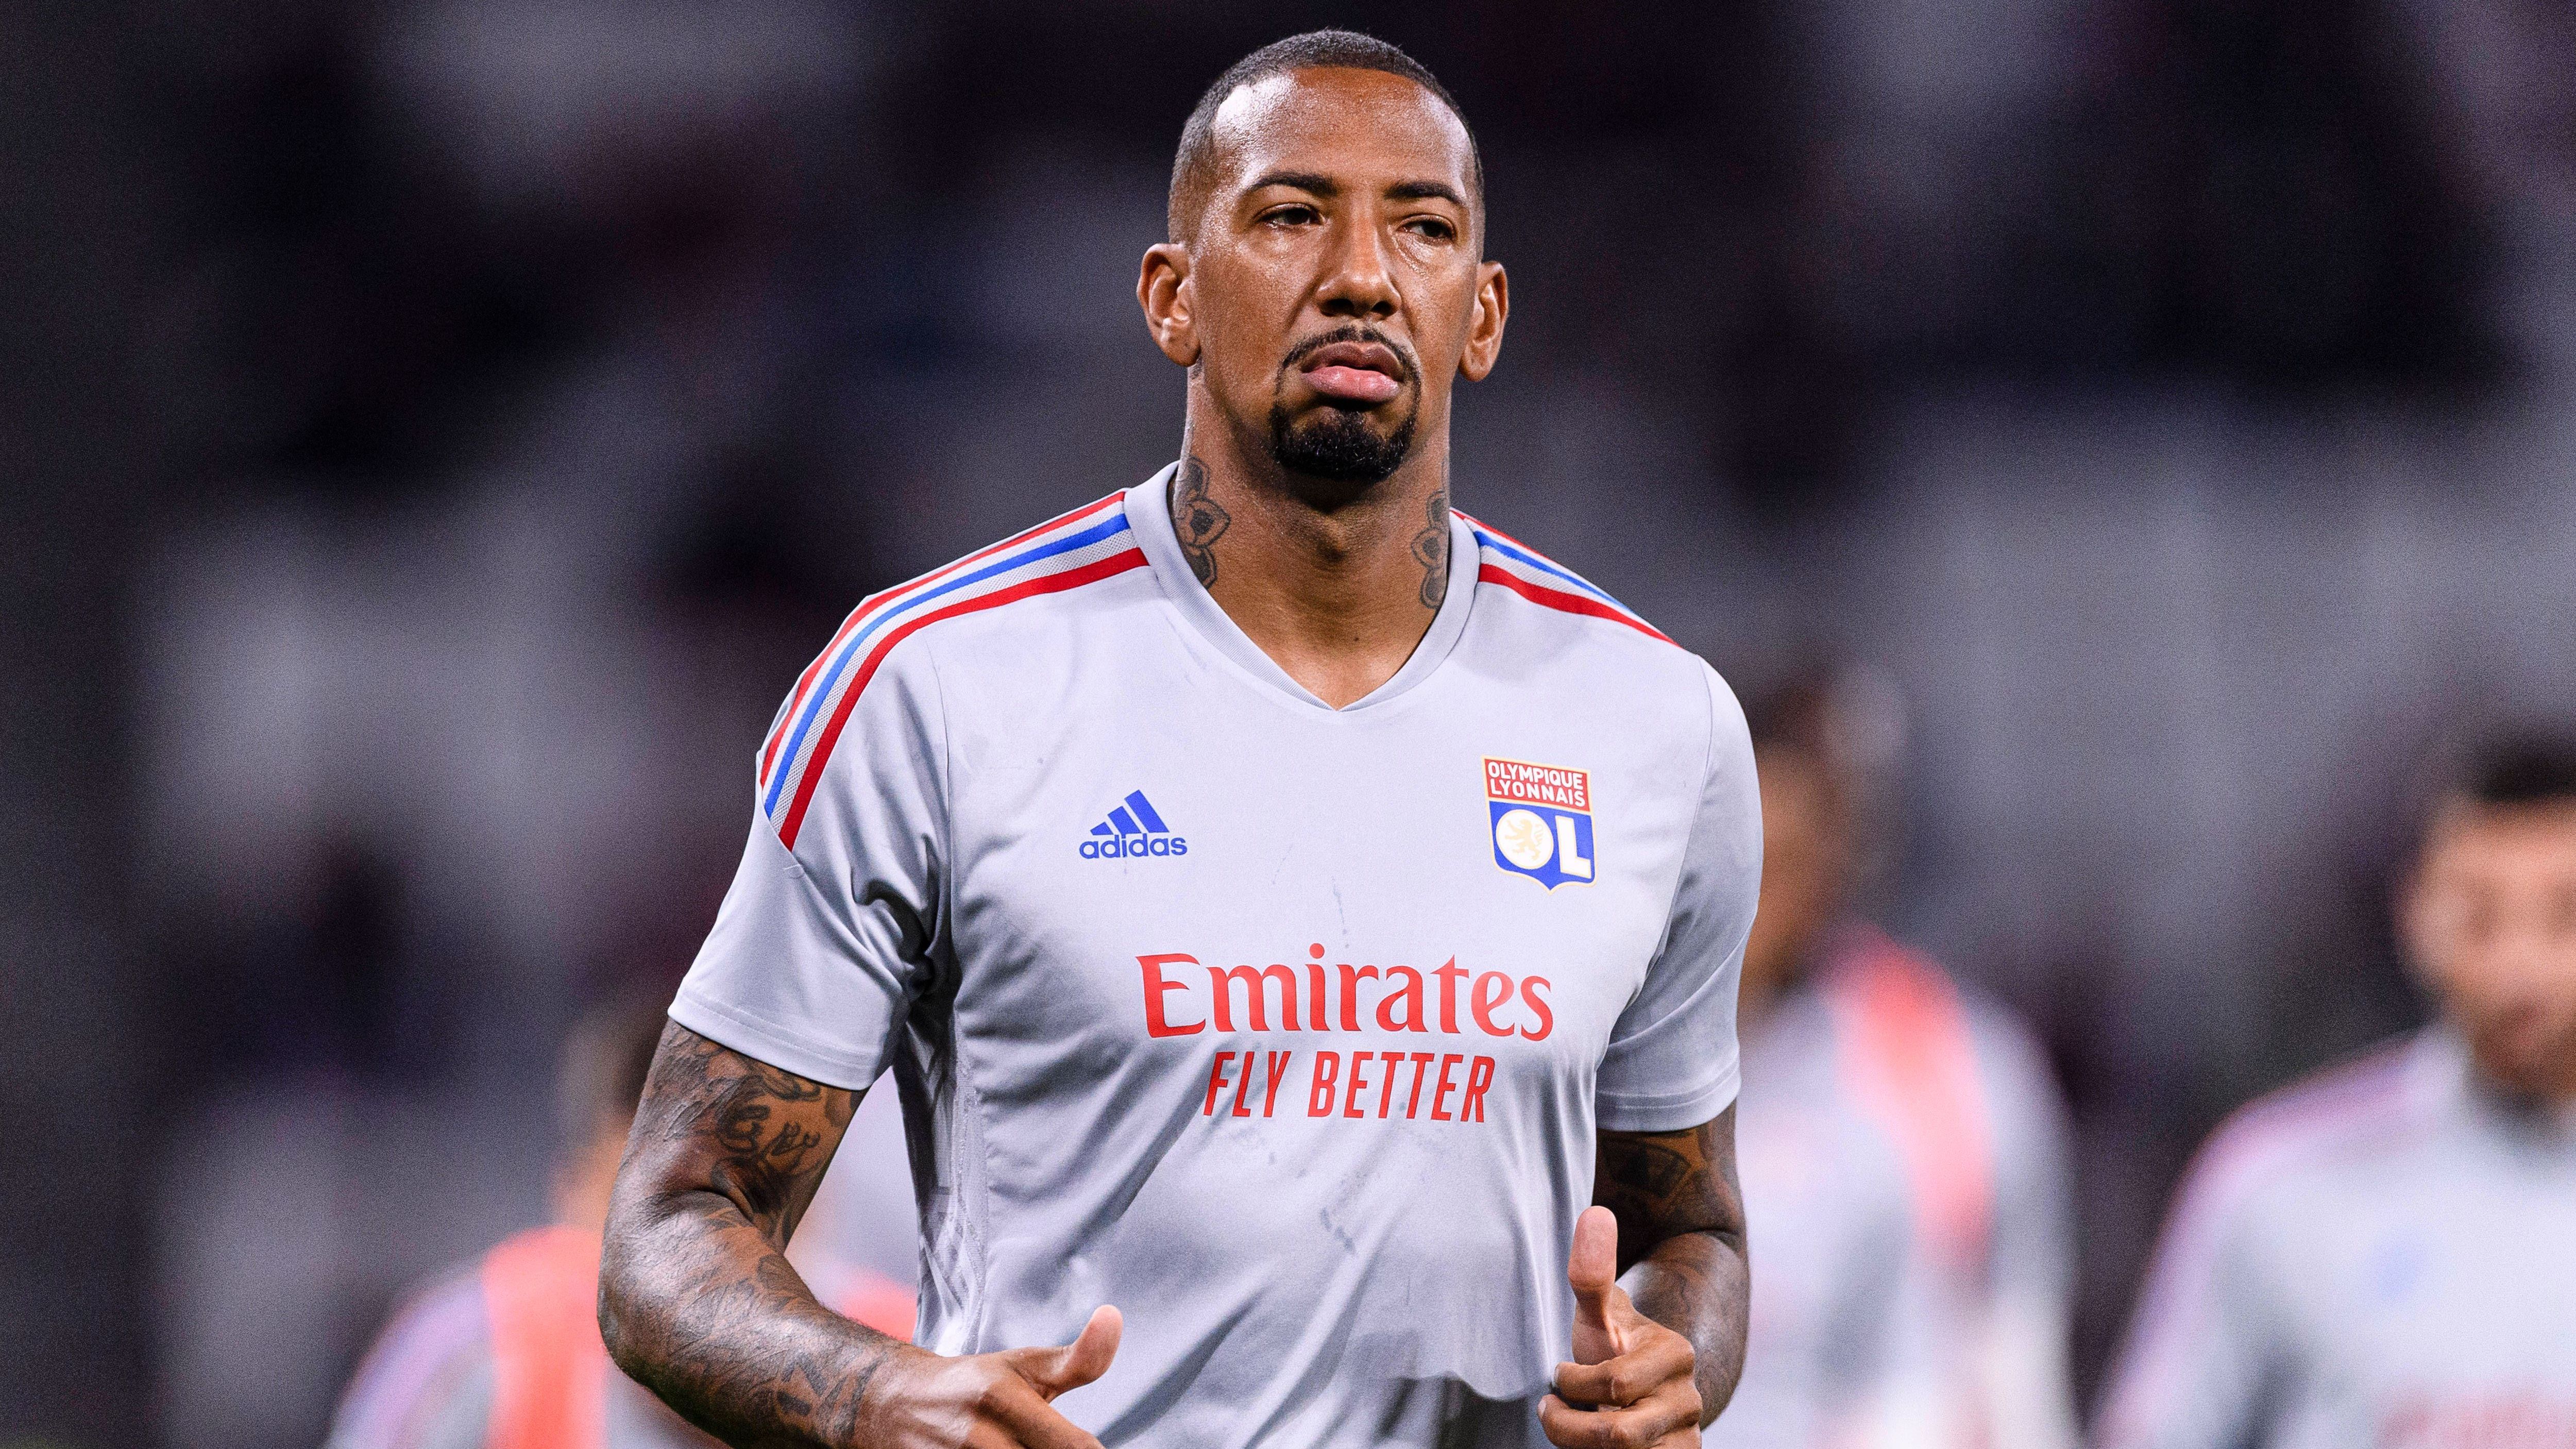 <strong>Jerome Boateng<br></strong><strong>- Position:</strong> Innenverteidiger<br><strong>- Alter:</strong> 35 Jahre<br><strong>- Zuletzt bei:</strong> Olympique Lyon